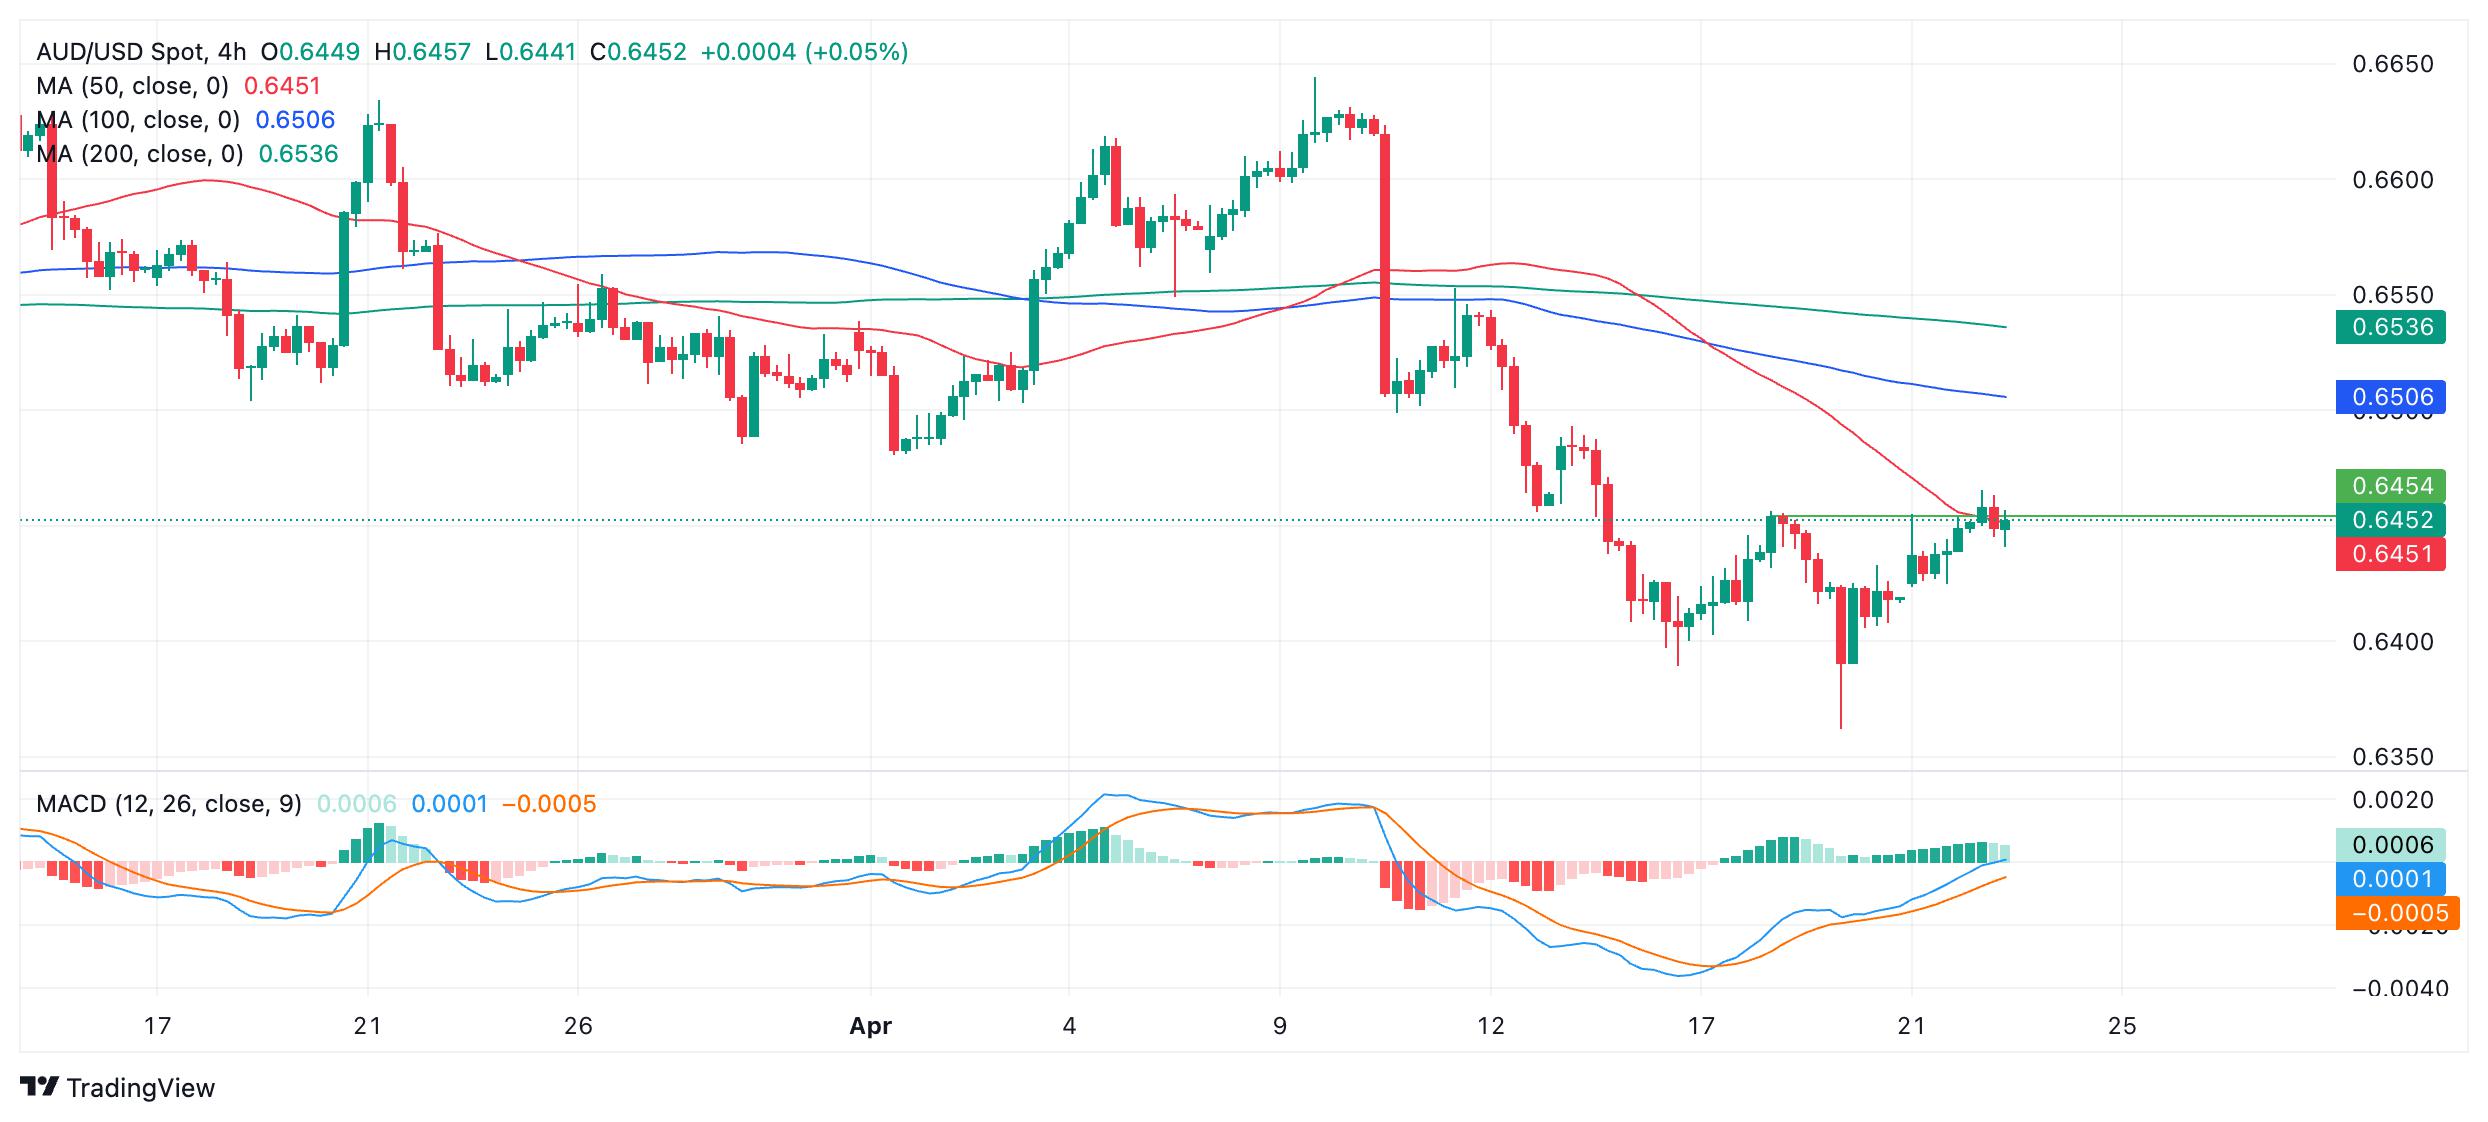 AUD/USD Price Analysis: Despite signs this is probably not a bullish reversal